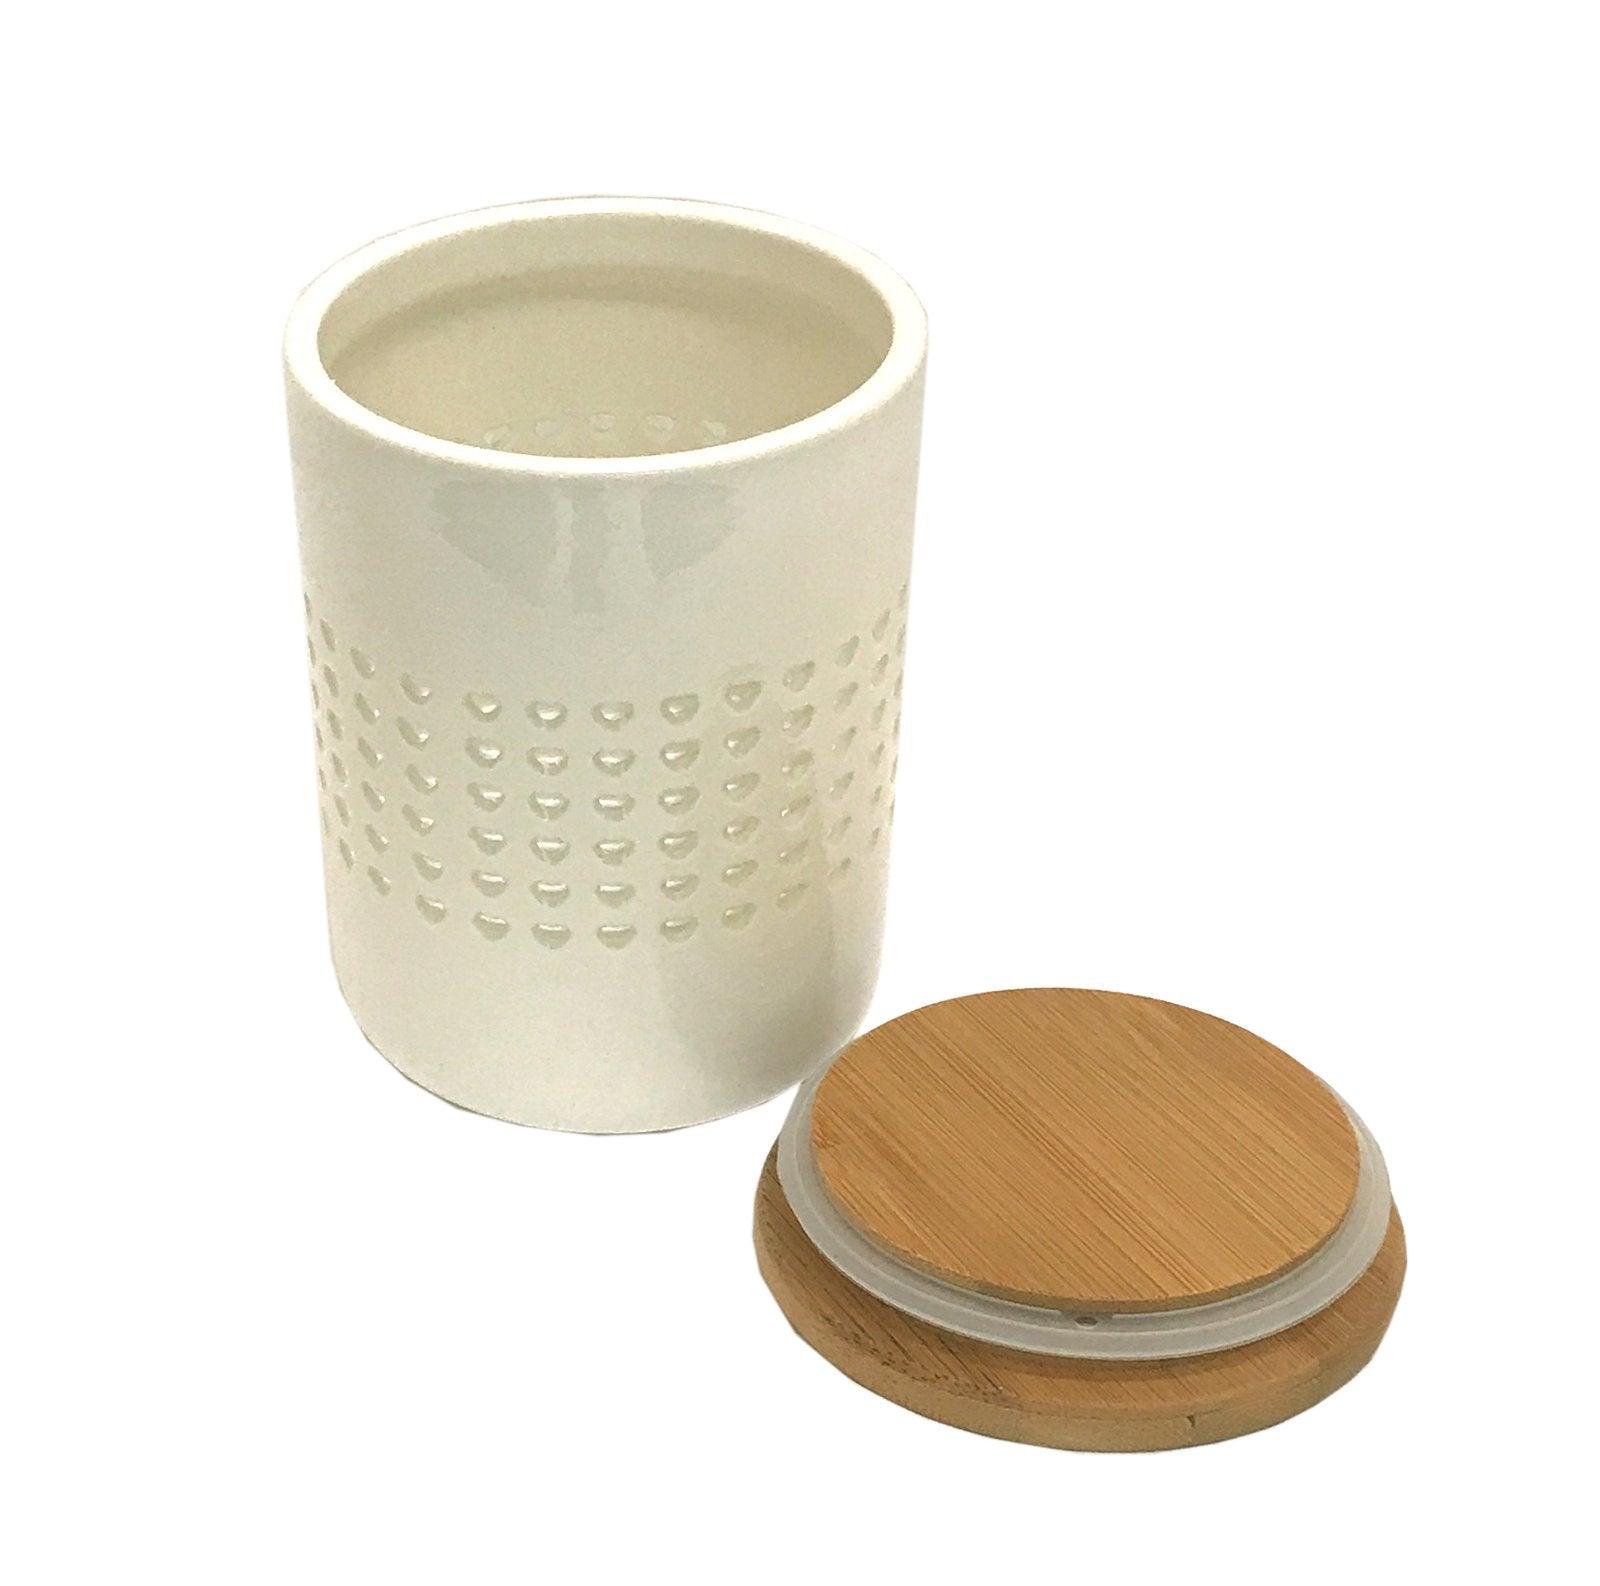 Heart Cut Out Storage Canister With Wood Lid - £20.99 - Kitchen Storage 